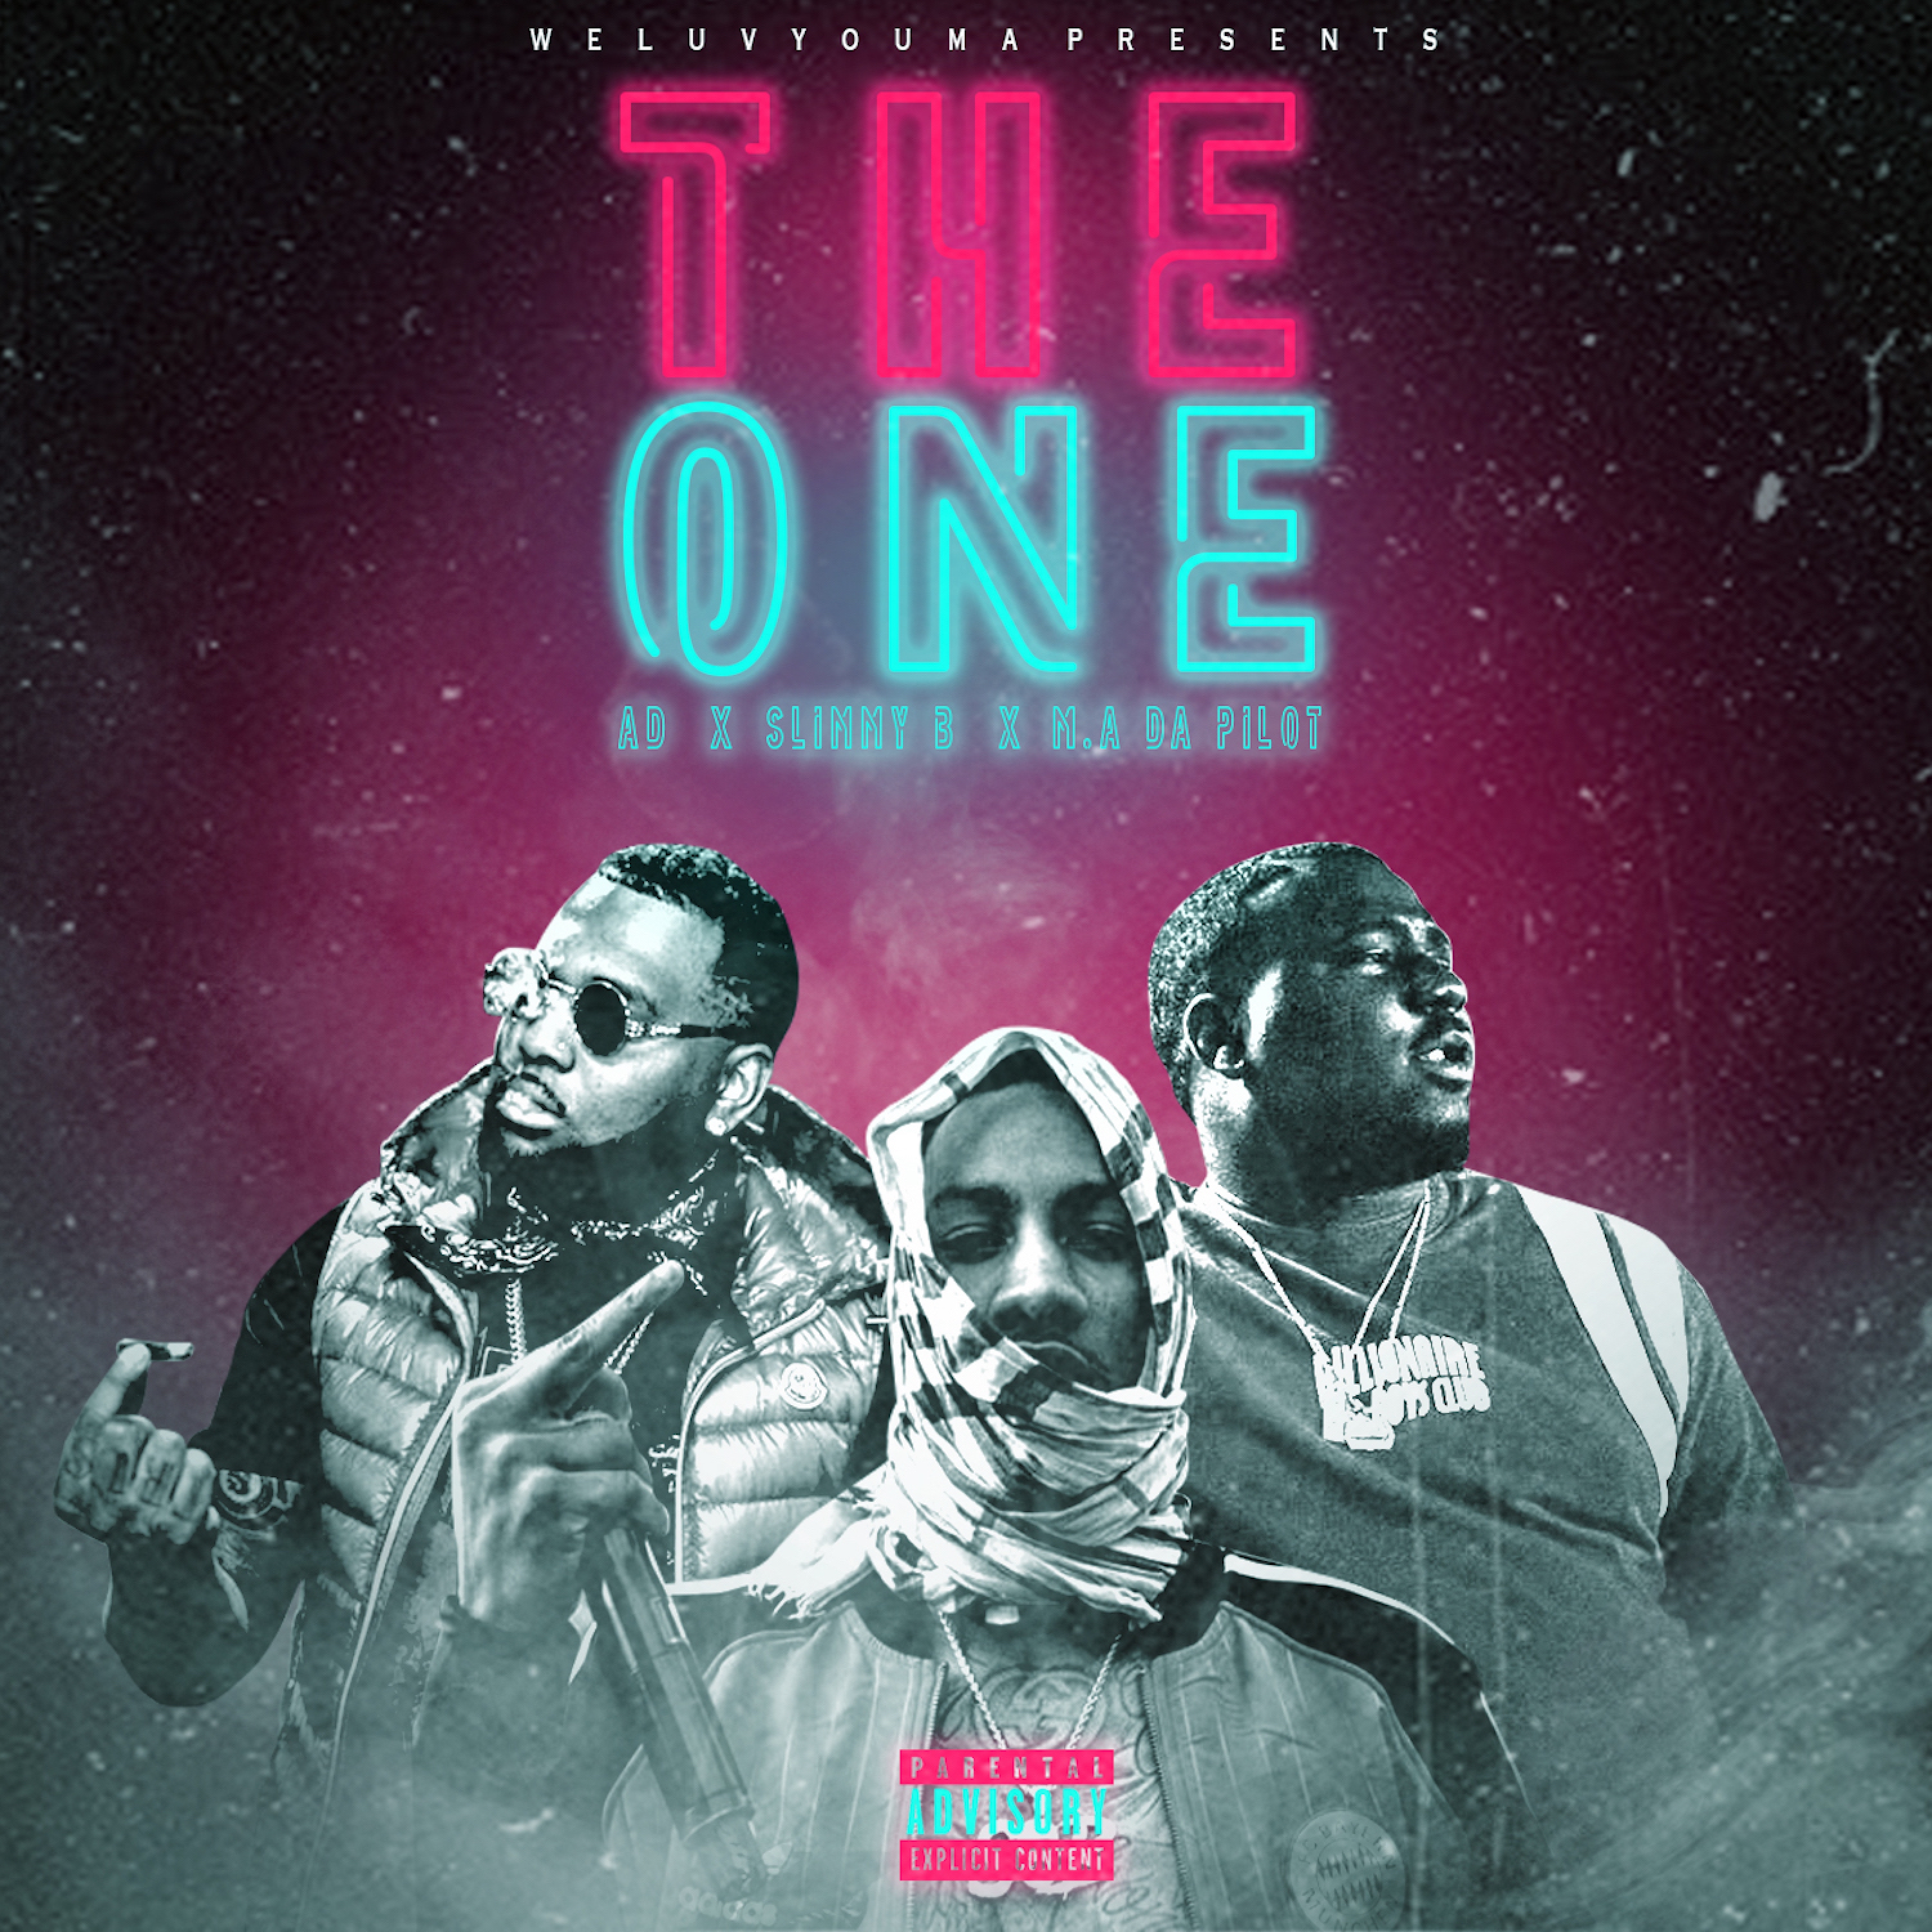 The One (feat. AD & Slimmy B)